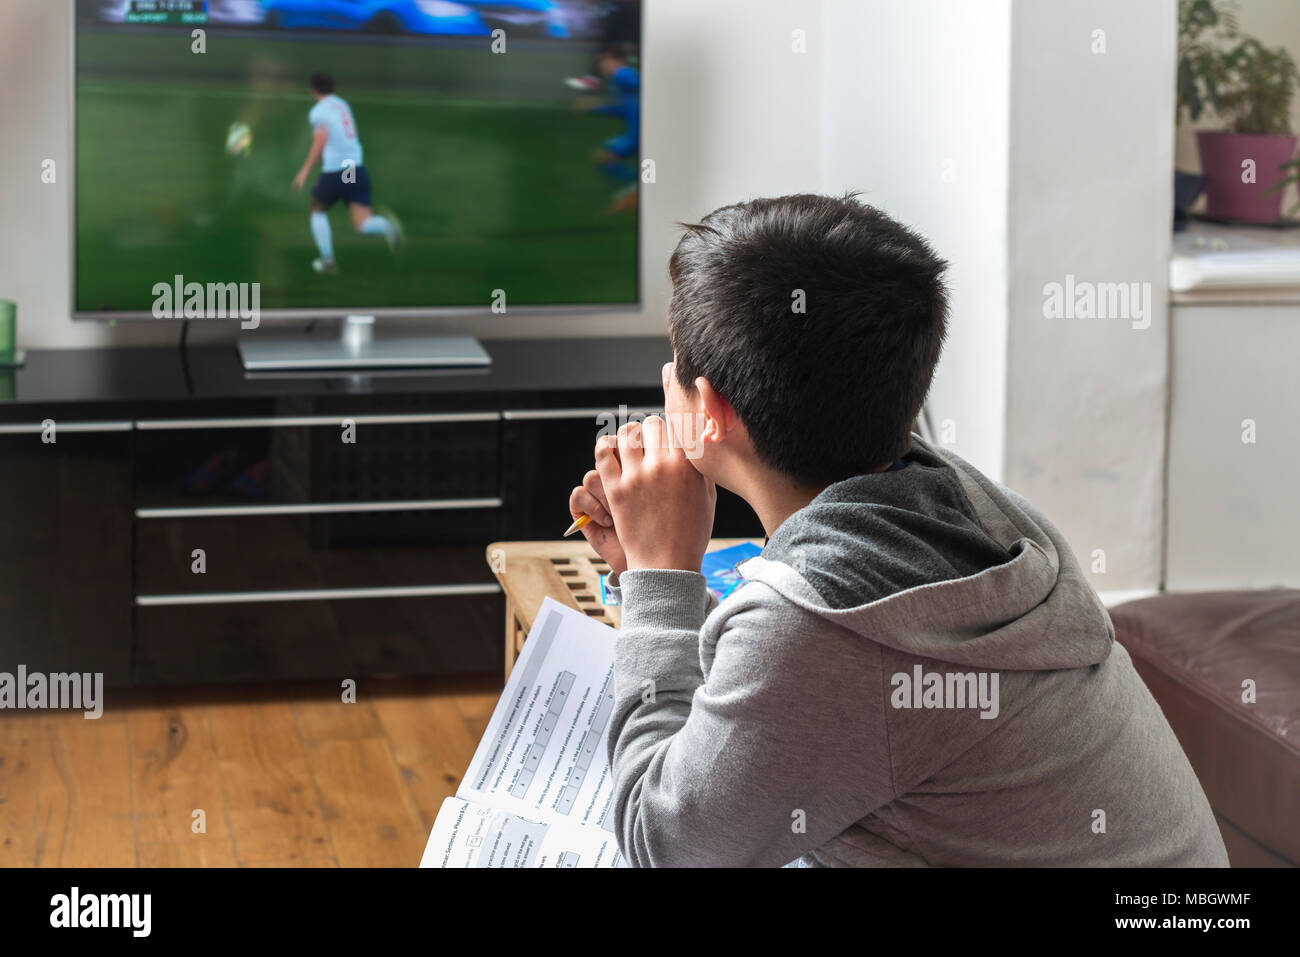 UK-Schoolboy ,10 years old ,trying to study while watching football match on TV Stock Photo